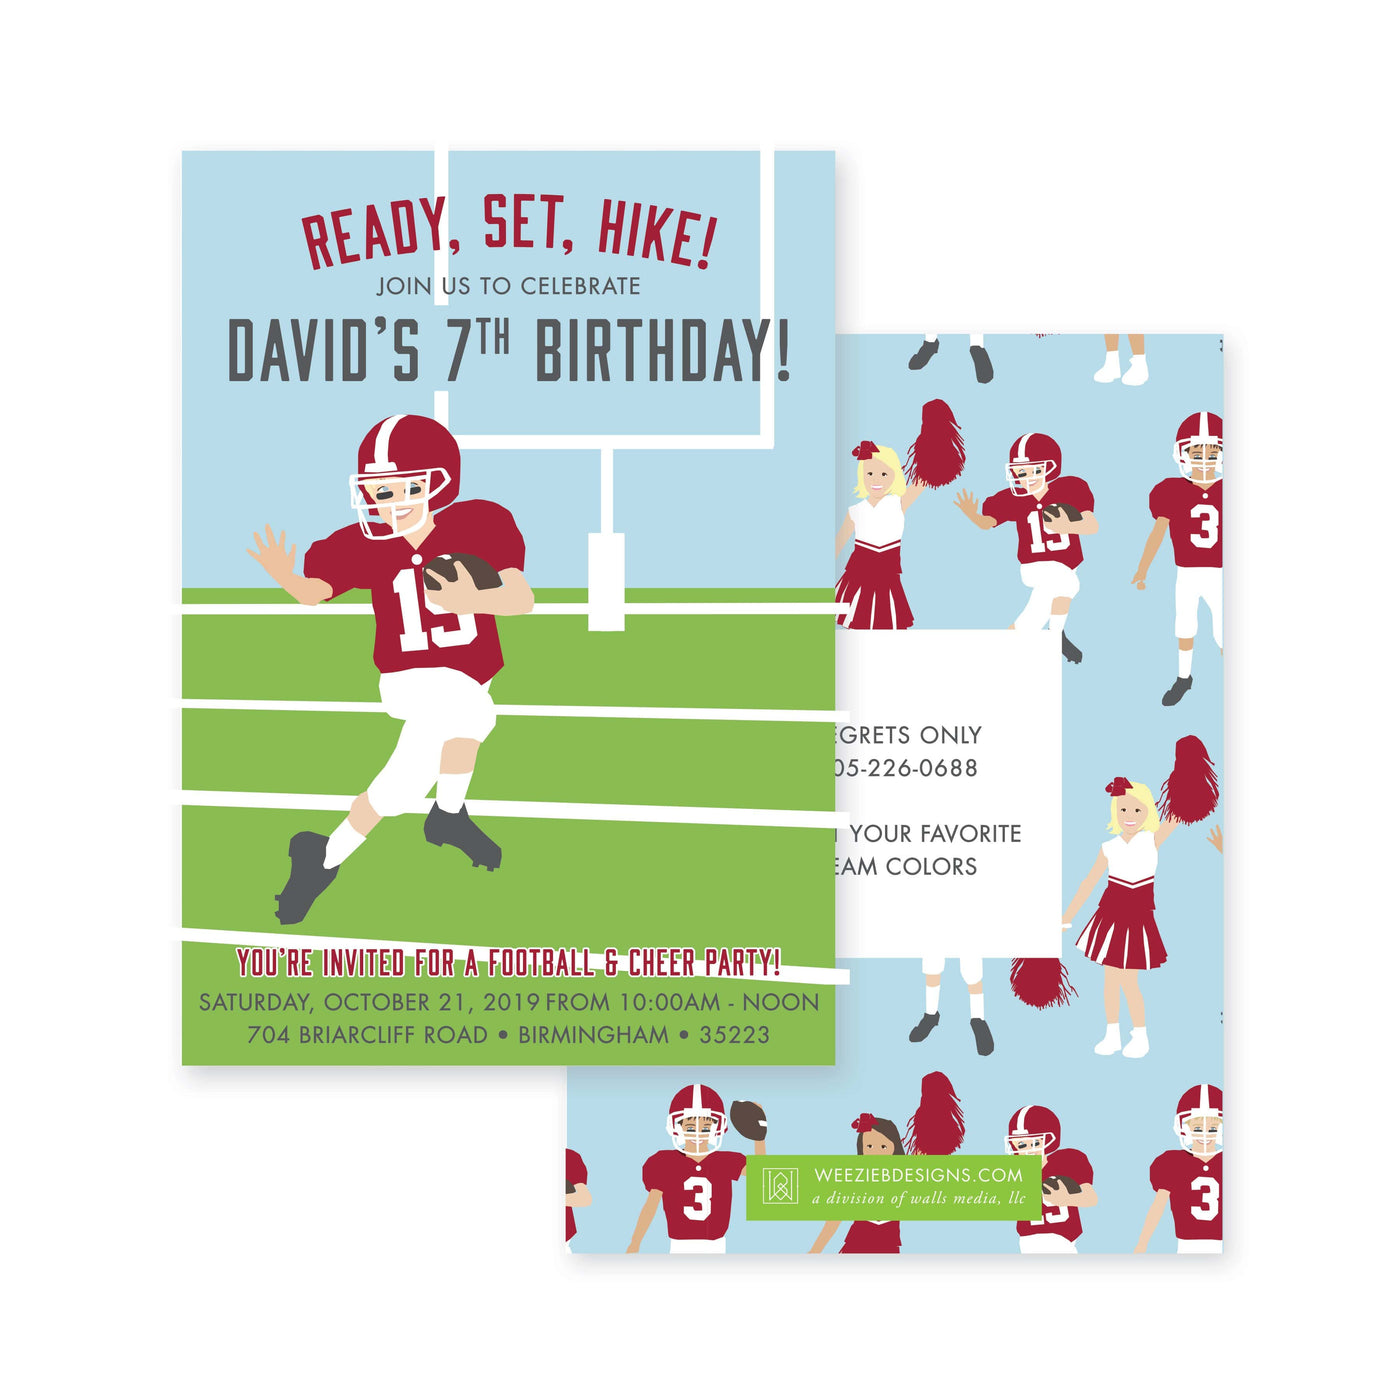 Weezie B. Designs | Football & Cheer Birthday Party Invitations